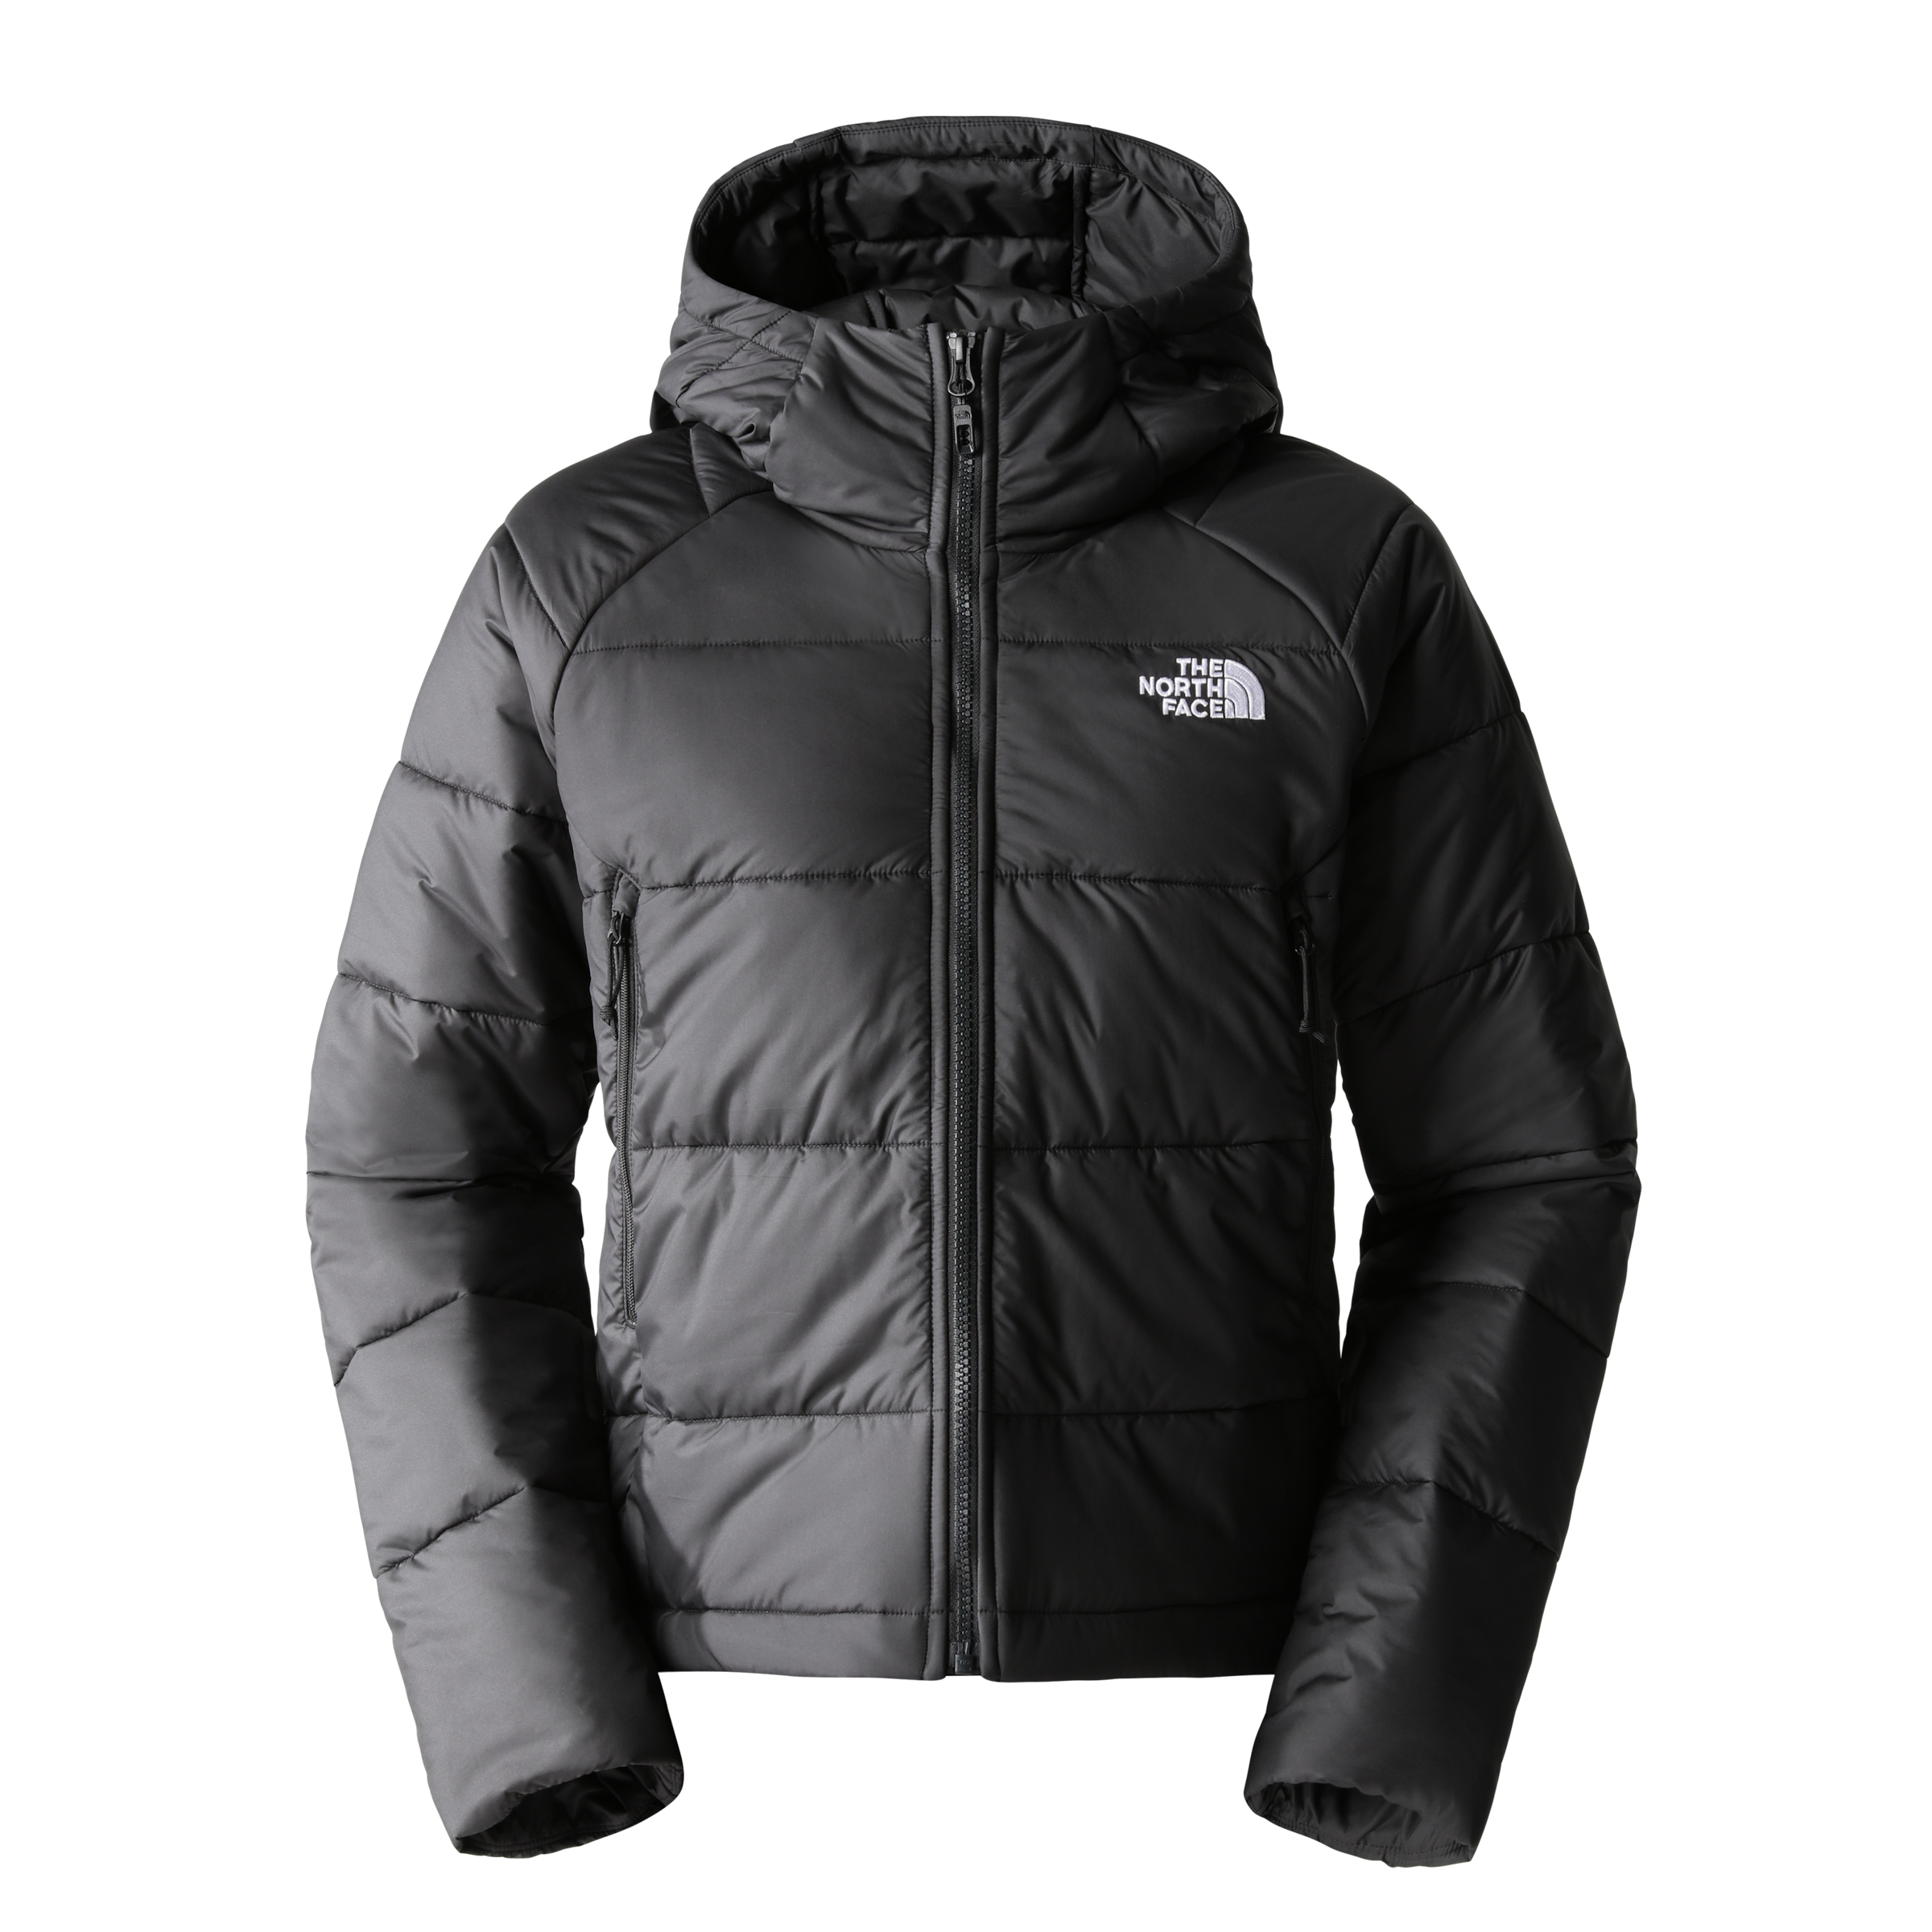 The North Face Funktionsjacke Kapuze, SYNTHETIC | mit HOODIE«, Logodruck HYALITE mit »W BAUR